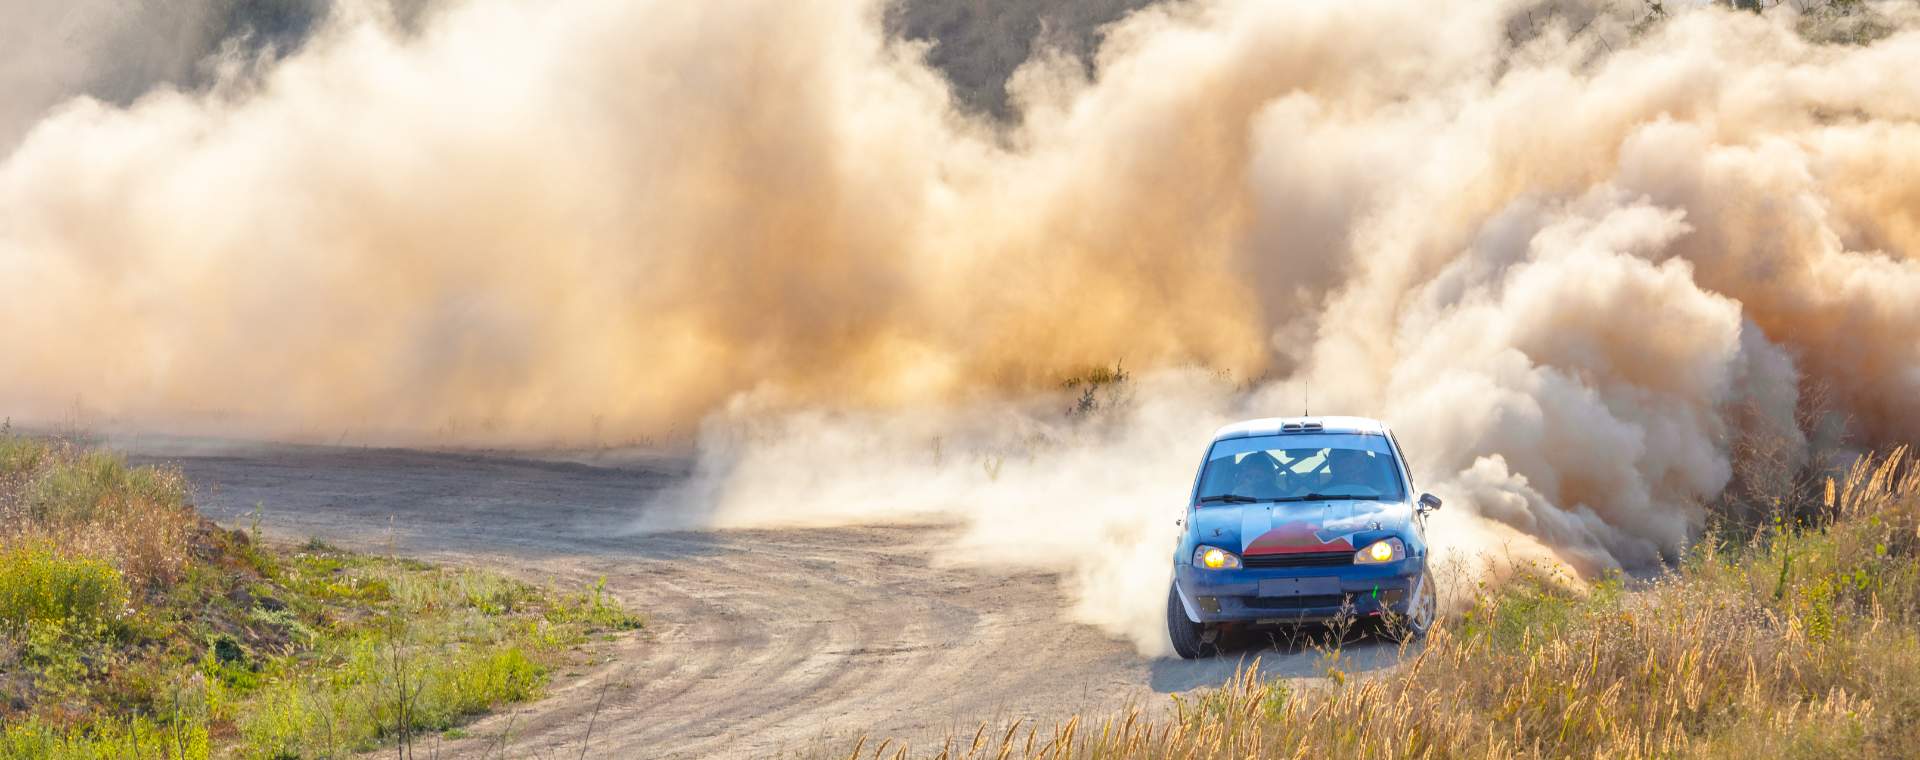 A car racing on a dirt road in East Yorkshire leaving huge plumes of dust behind it